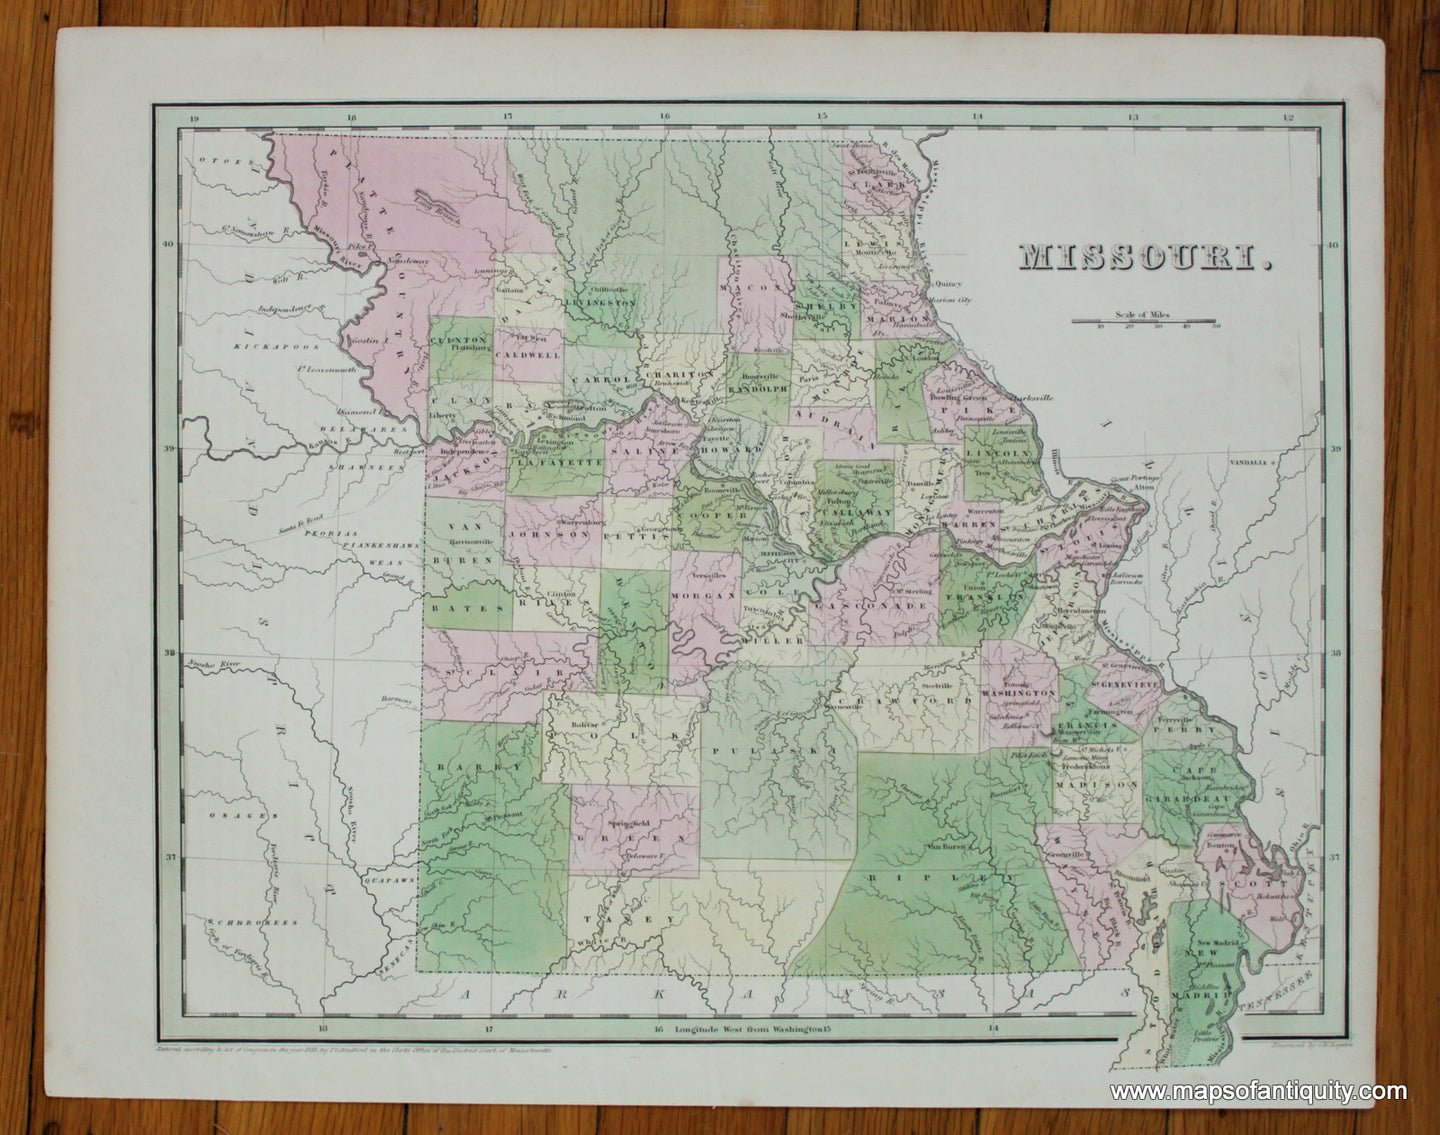 Antique-Hand-Colored-Map-Missouri.-United-States-Midwest-1838-Bradford-Maps-Of-Antiquity